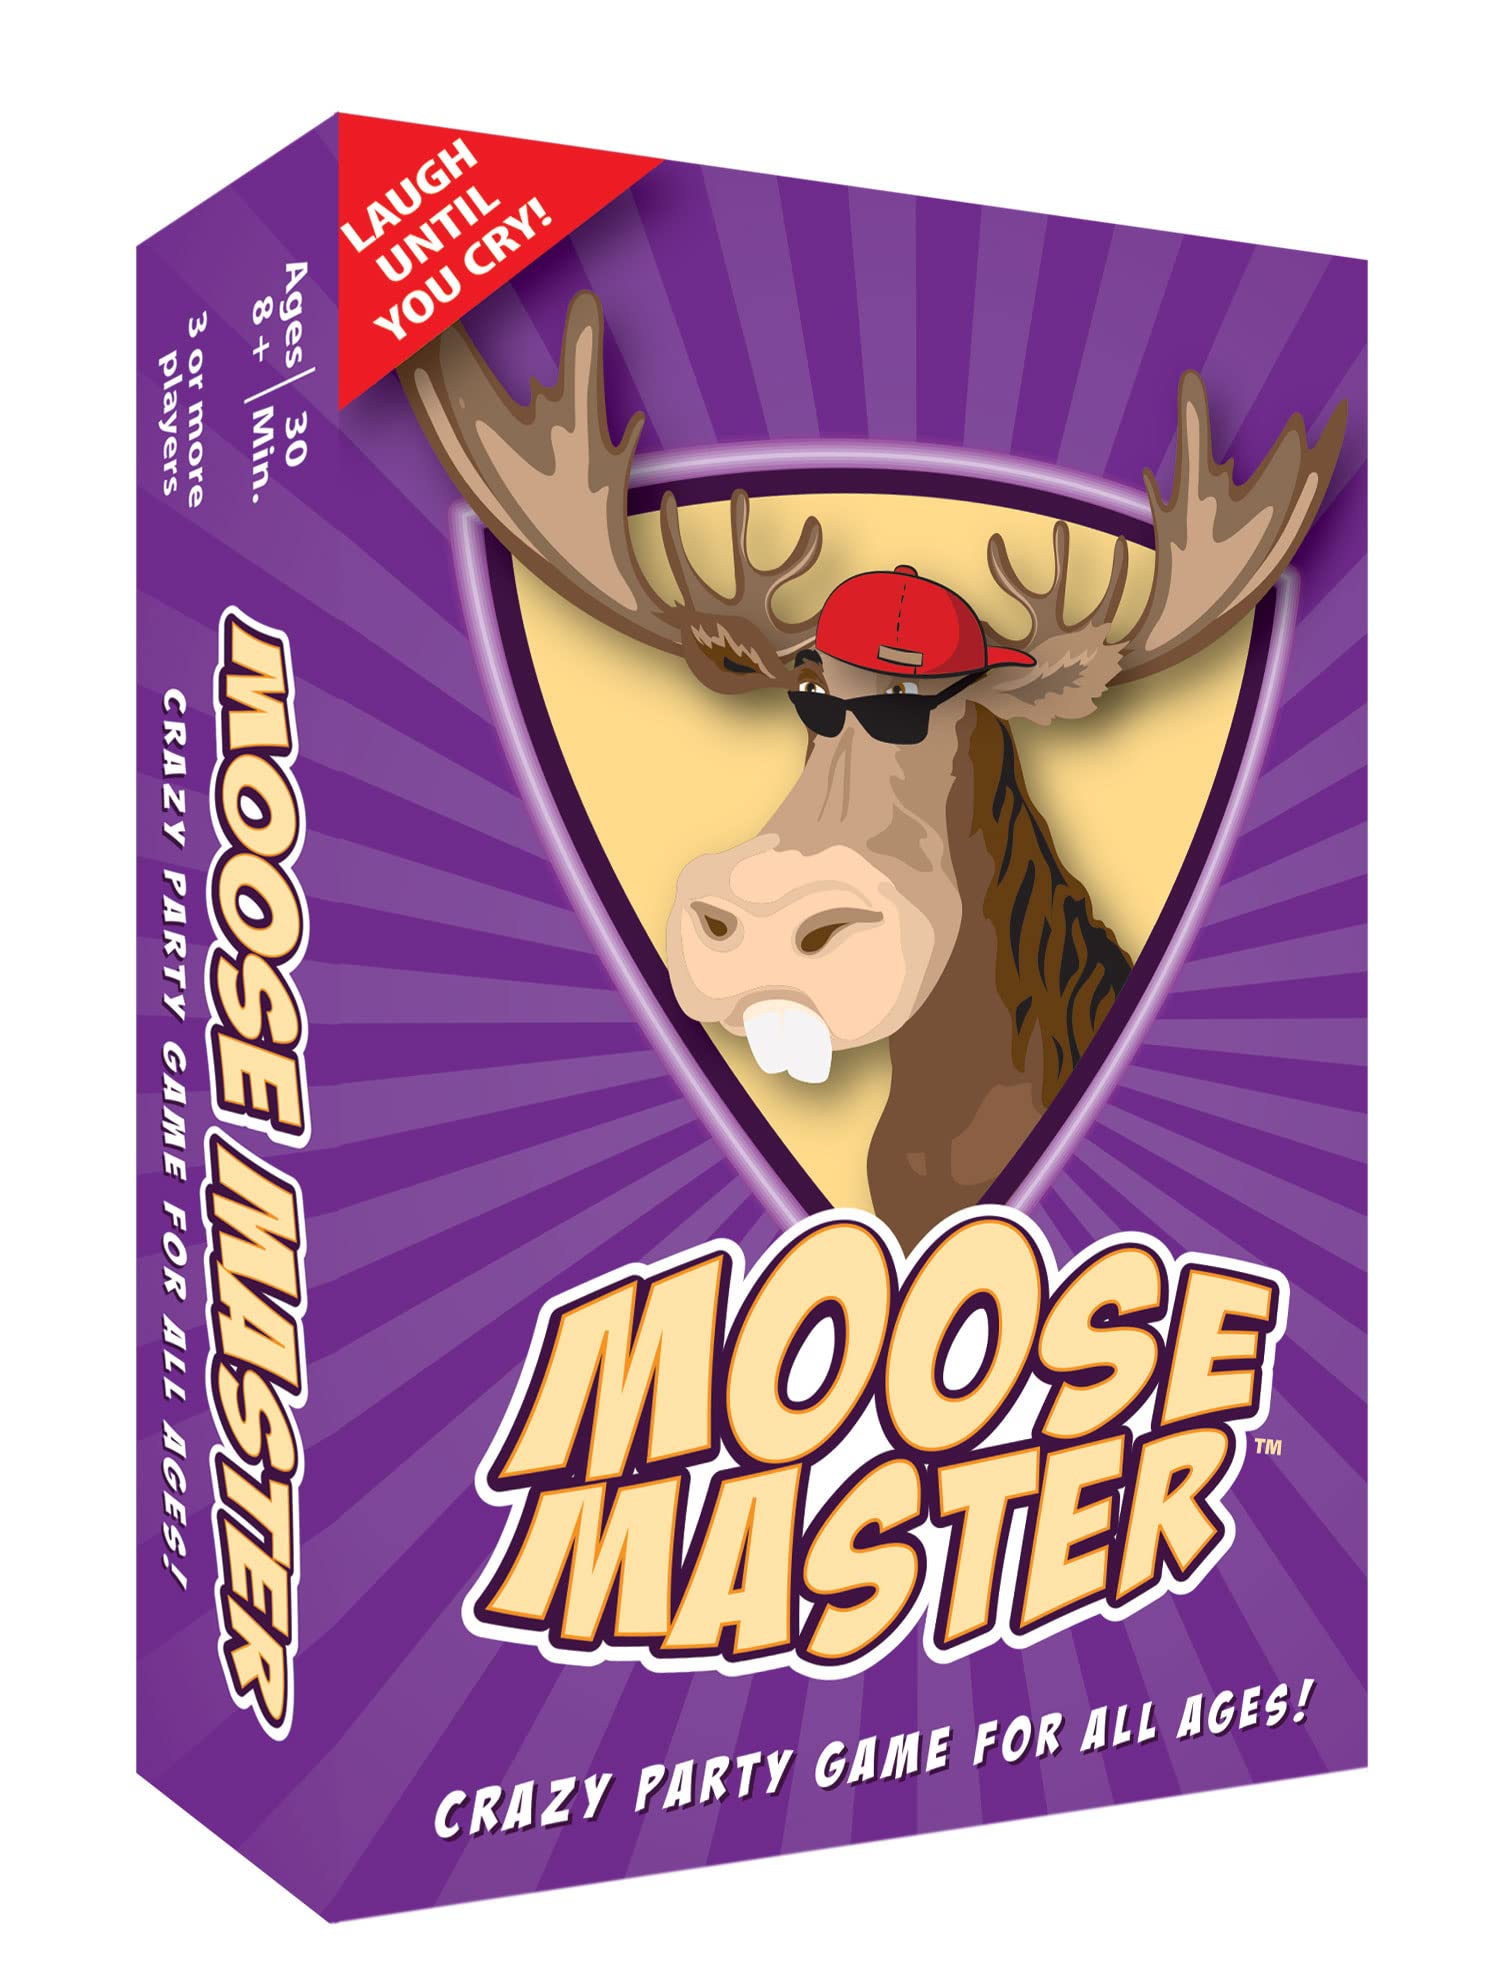 Moose Master - Laugh Until You Cry or Pee Your Pants Fun - Your Cheeks Will Hurt from Smiling and Laughing so Hard - for Fun People Looking for A Hilarious Night in a Box